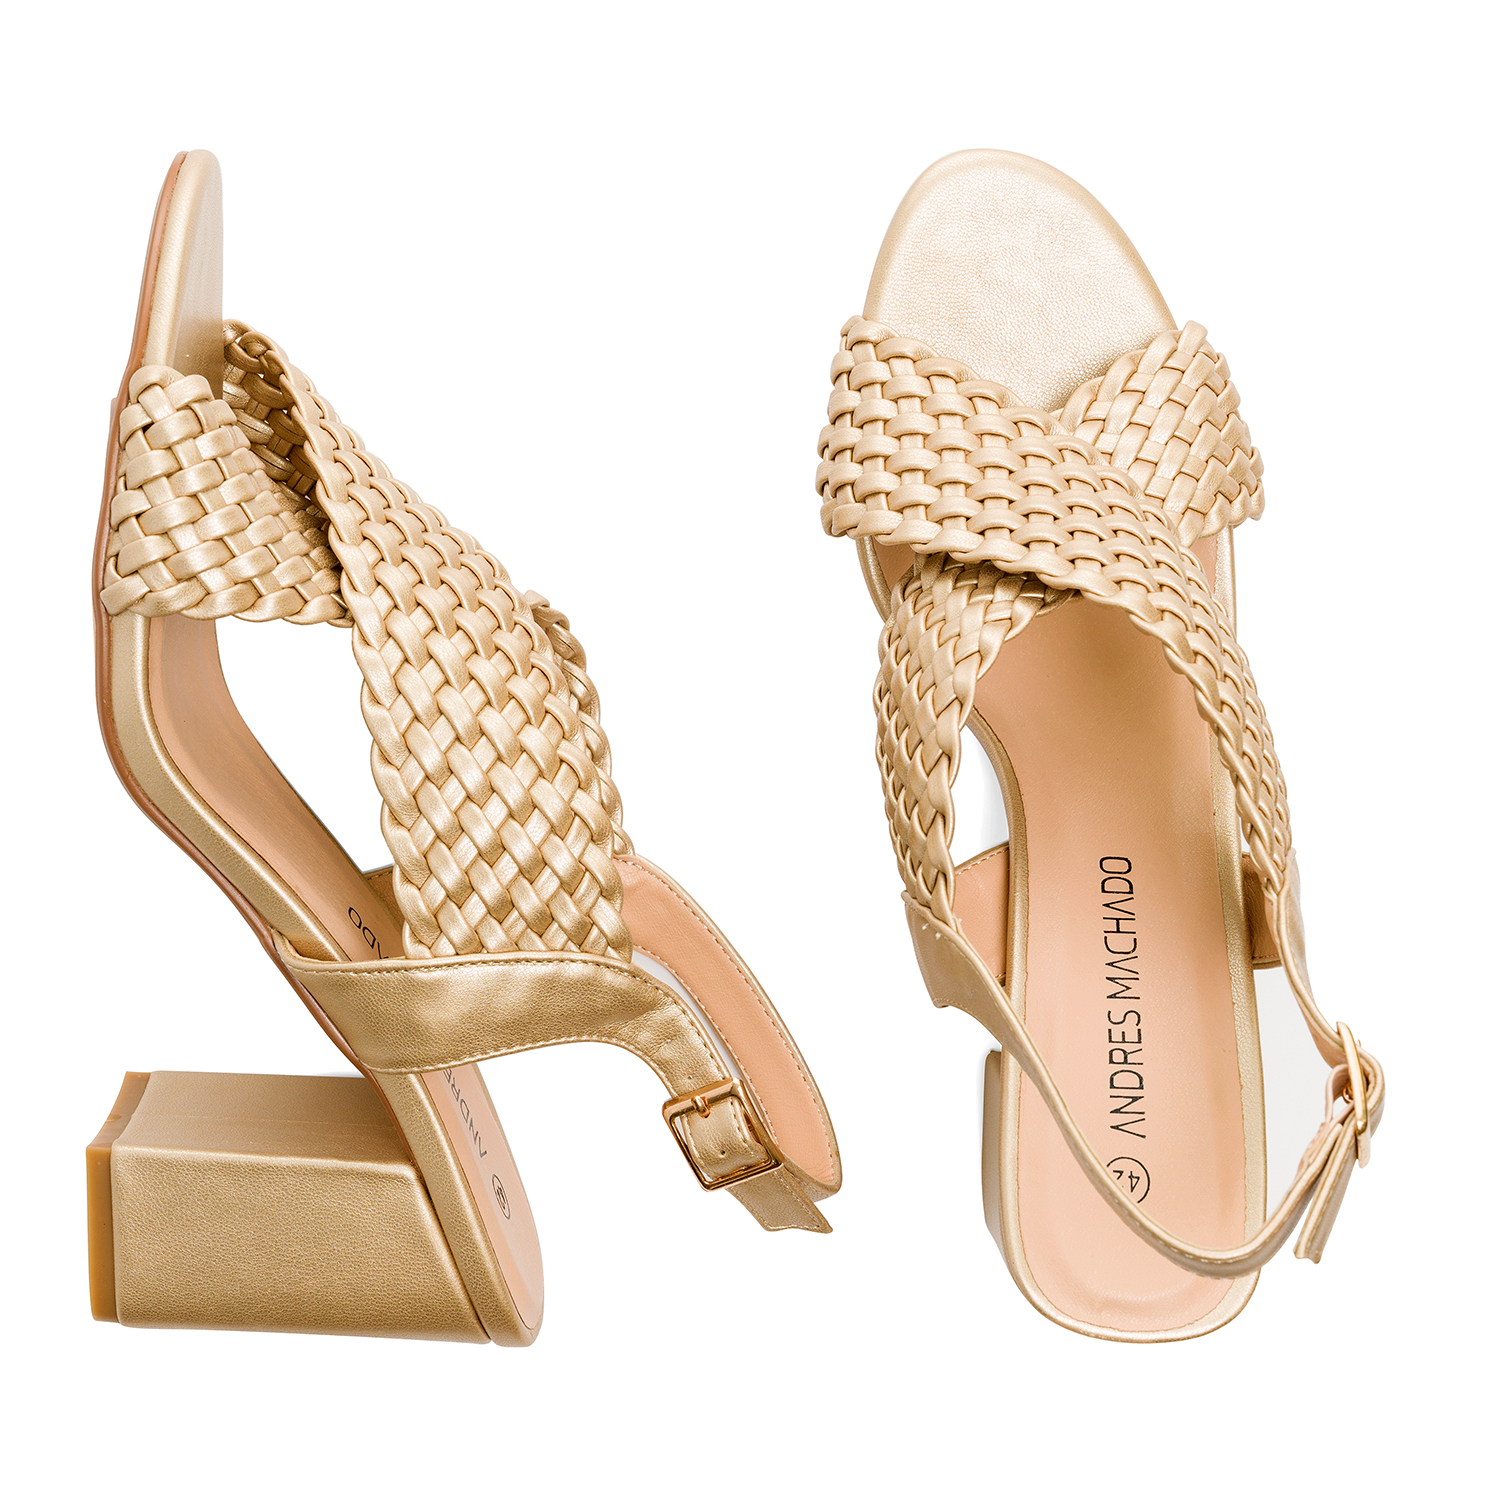 Braided gold faux leather sandals 